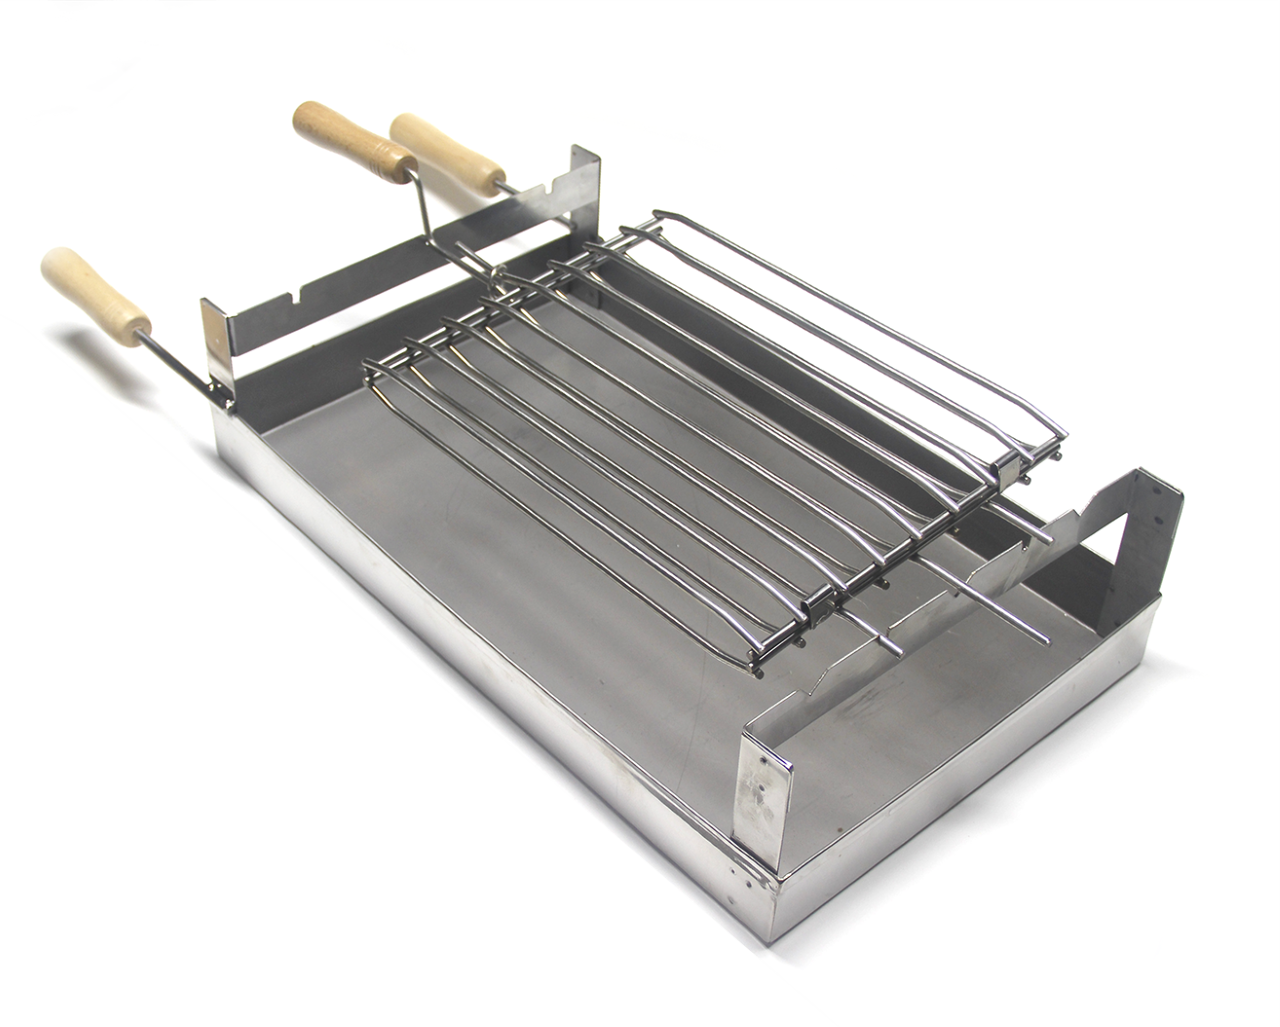 Grille INOX pour Four à bois AC38F-My Barbecue